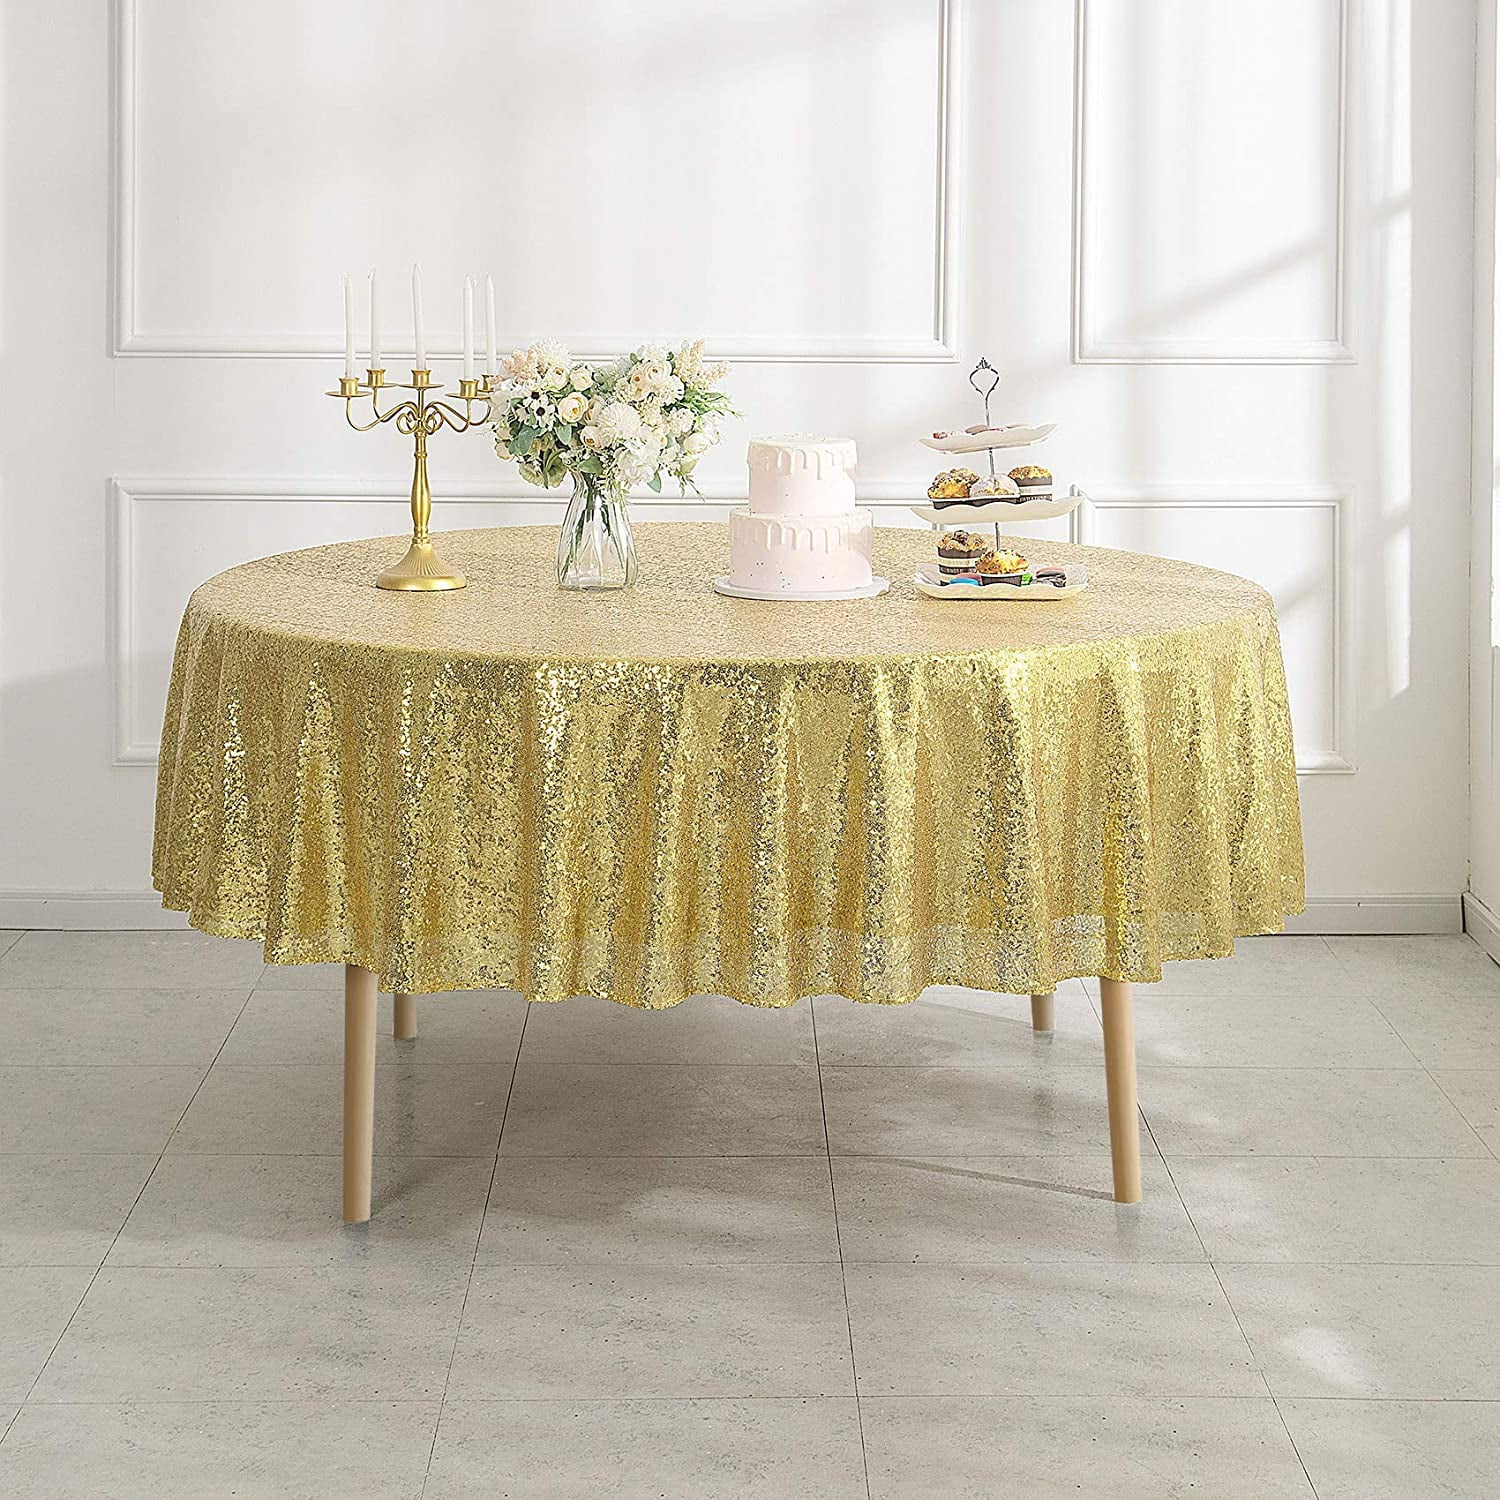 Sequin Gold Tablecloth 50x80 Inch Birthday Wedding Tablecloths for Rectangle Tables